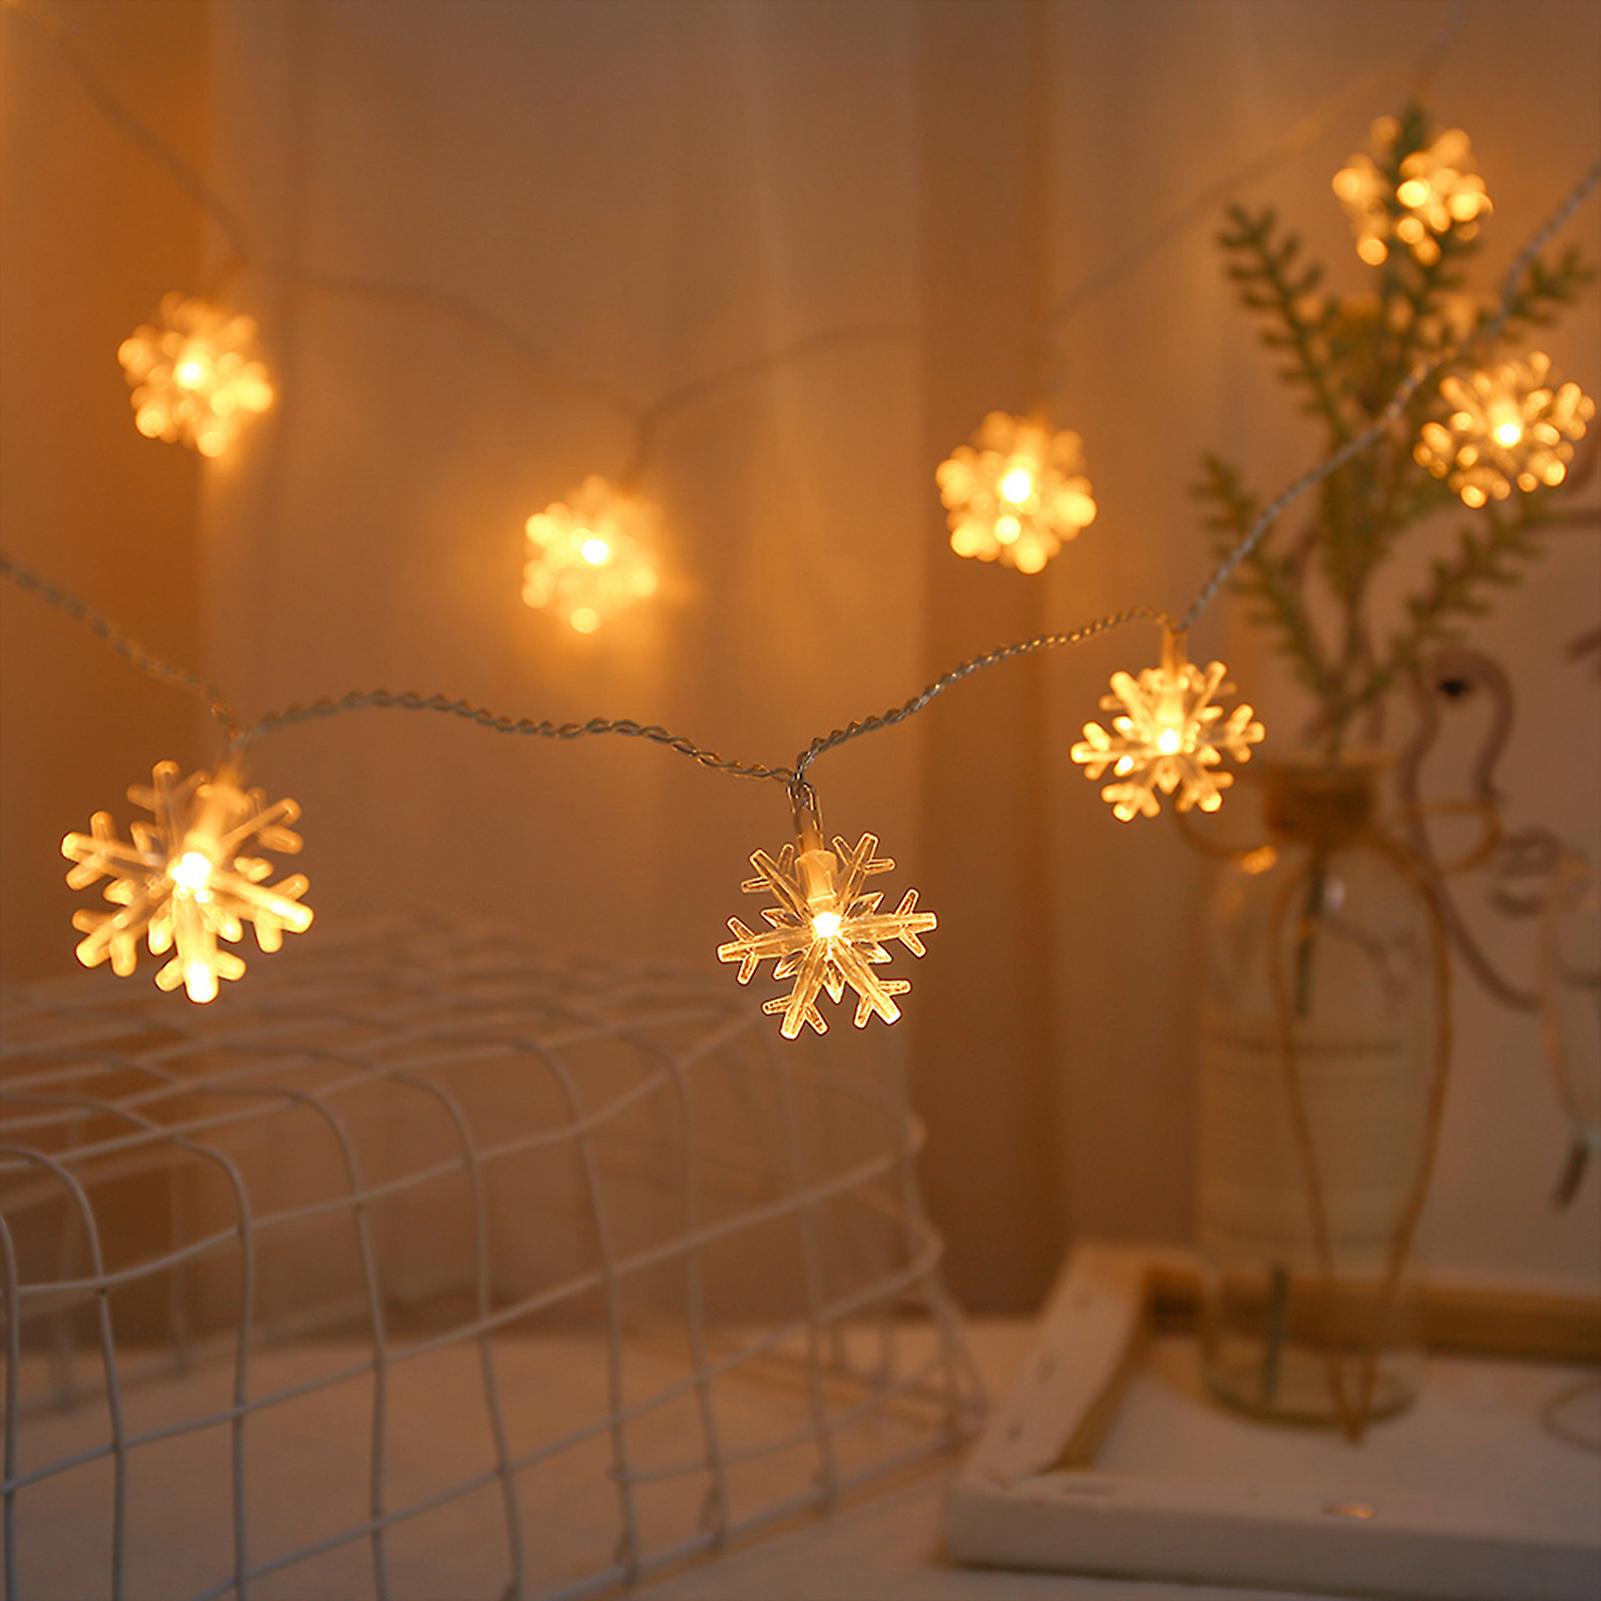 Snowflake Usb String Light Room Decoration Christmas Holiday Party Light Outdoor Camping Decorative Modeling Hanging Lamp No.254033